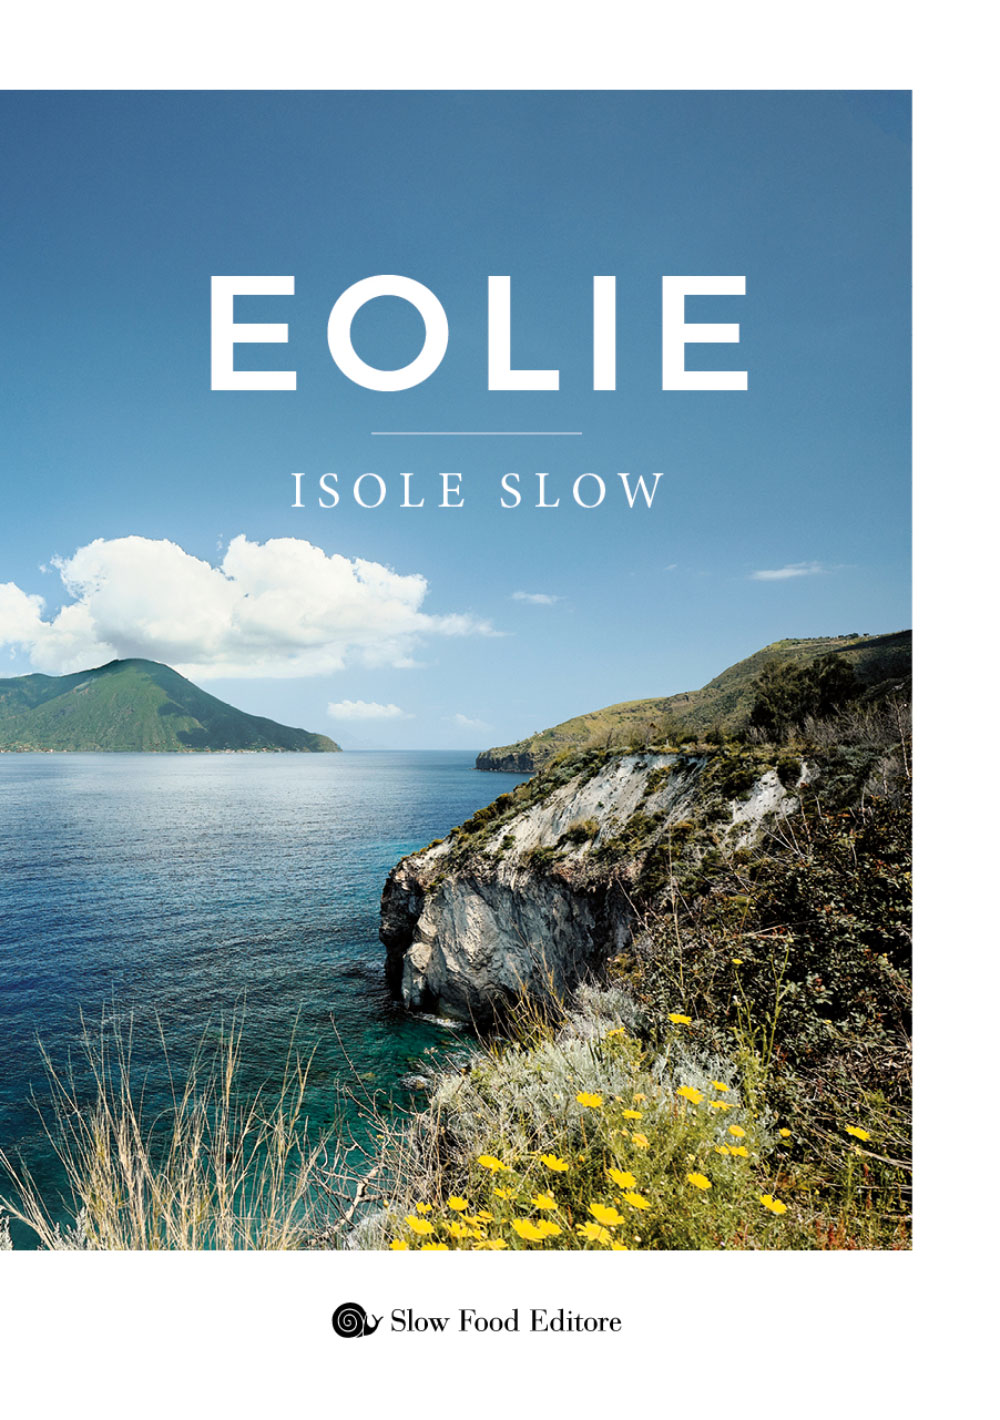 Eolie. Isole slow